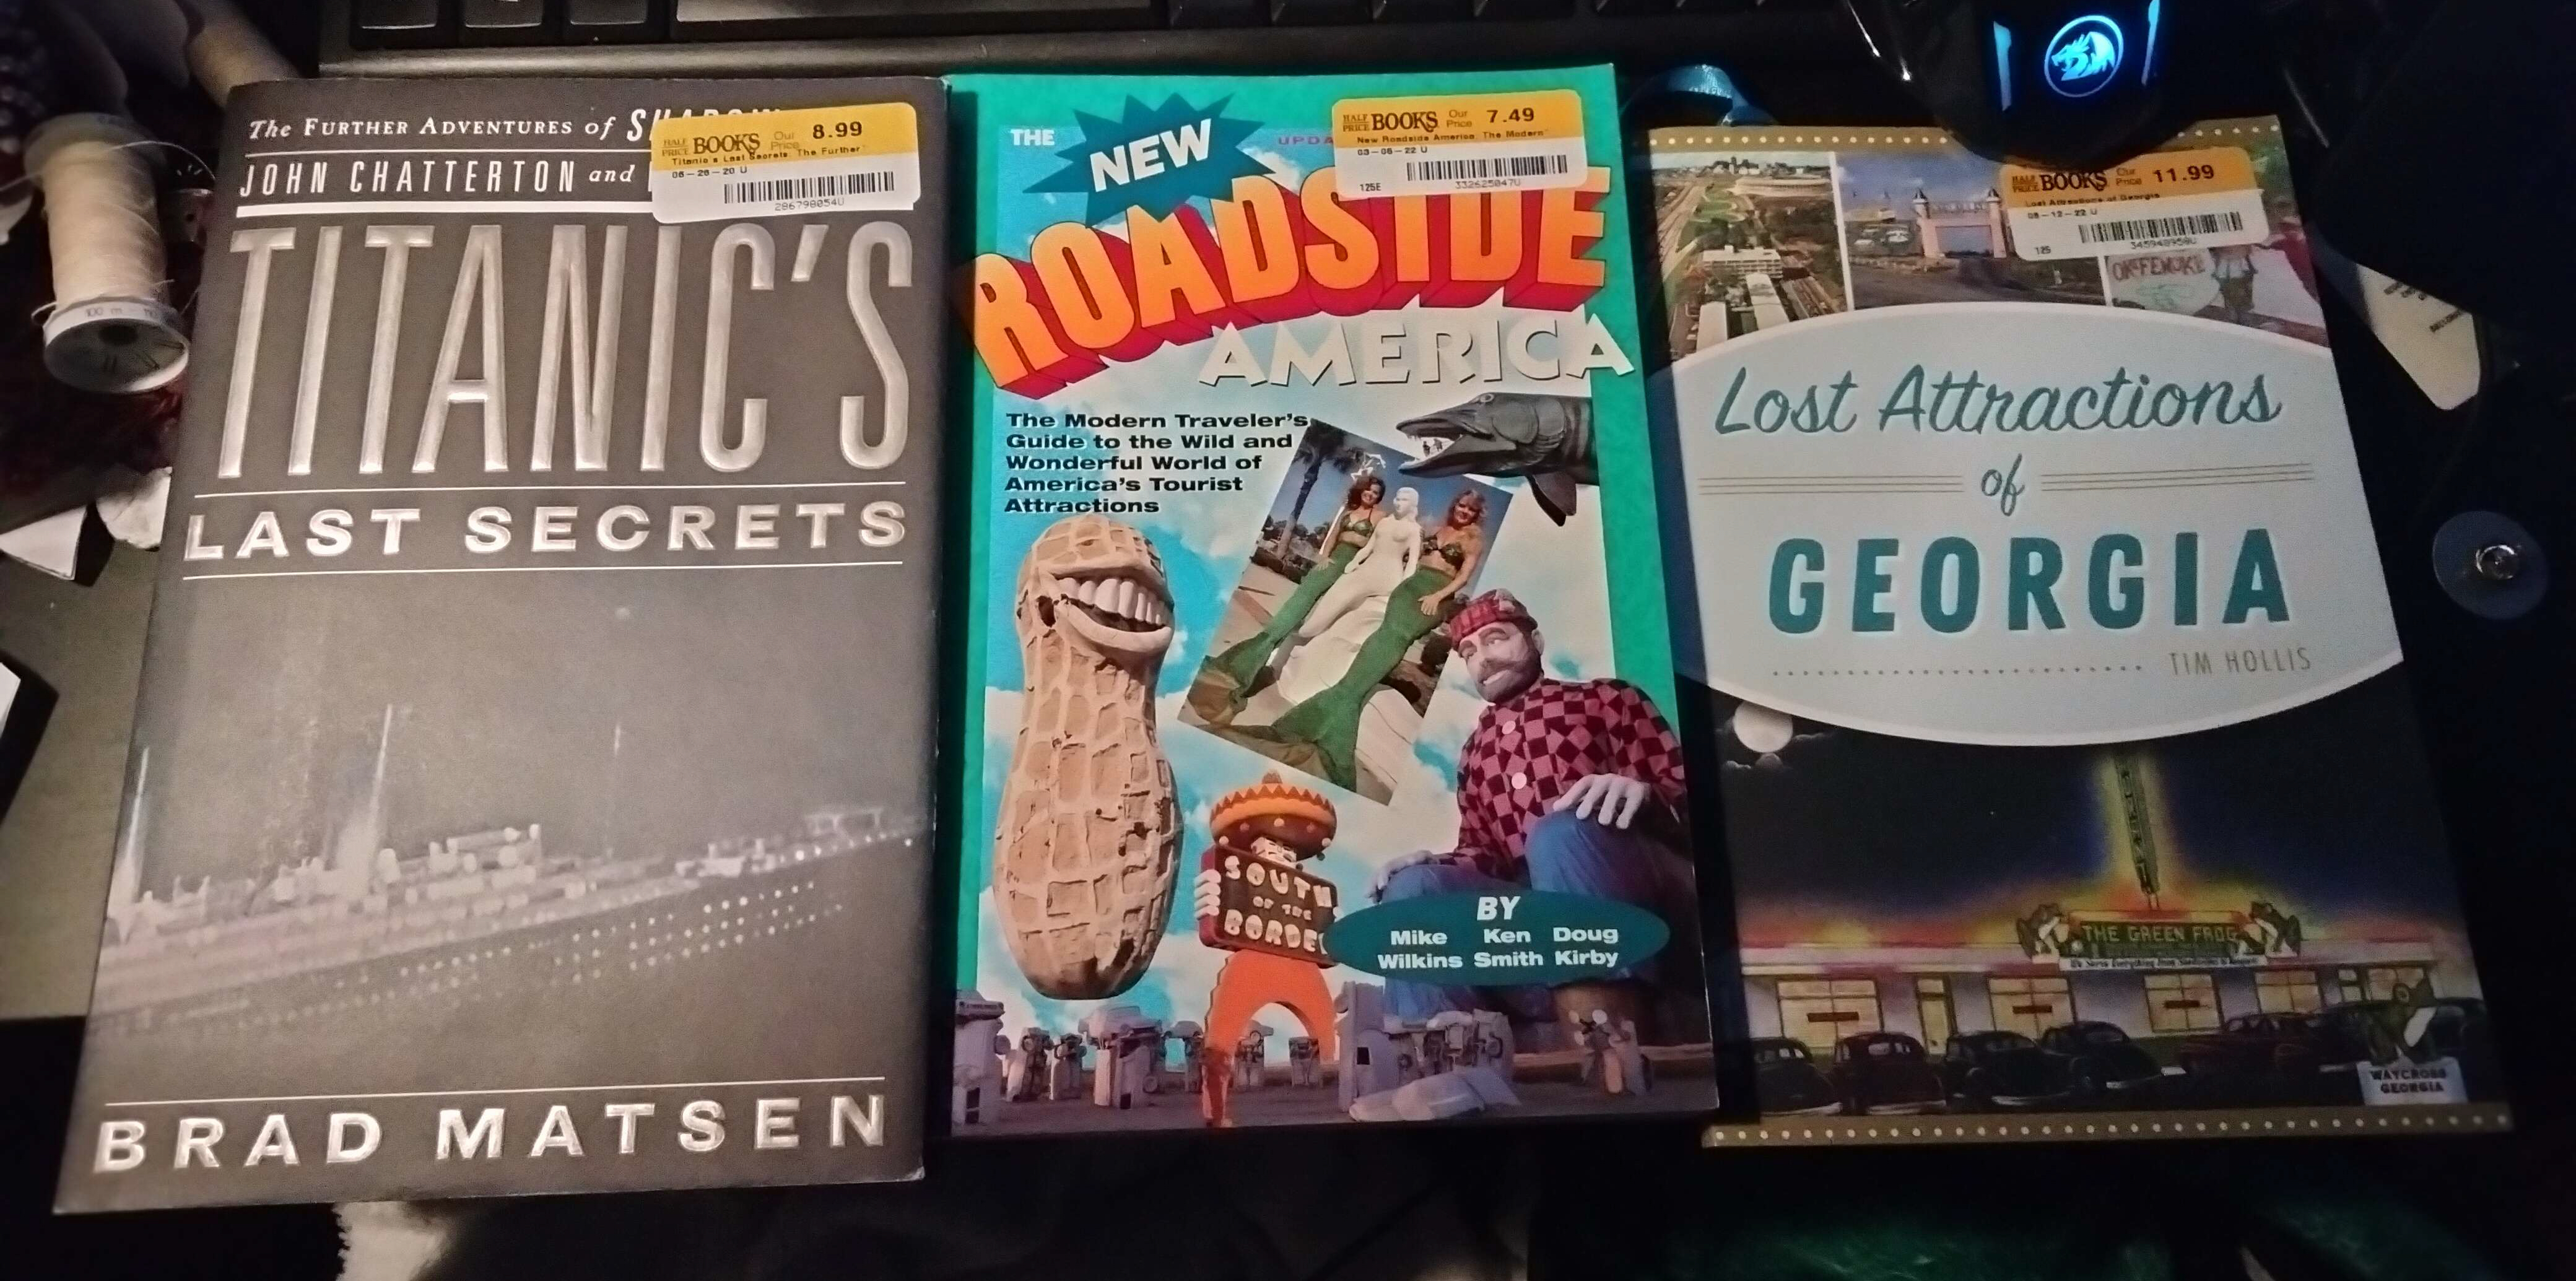 A photograph taken on a desk that shows off three books: New Roadside America, Lost Attractions of Georgia, and Titanic's Last Secrets.